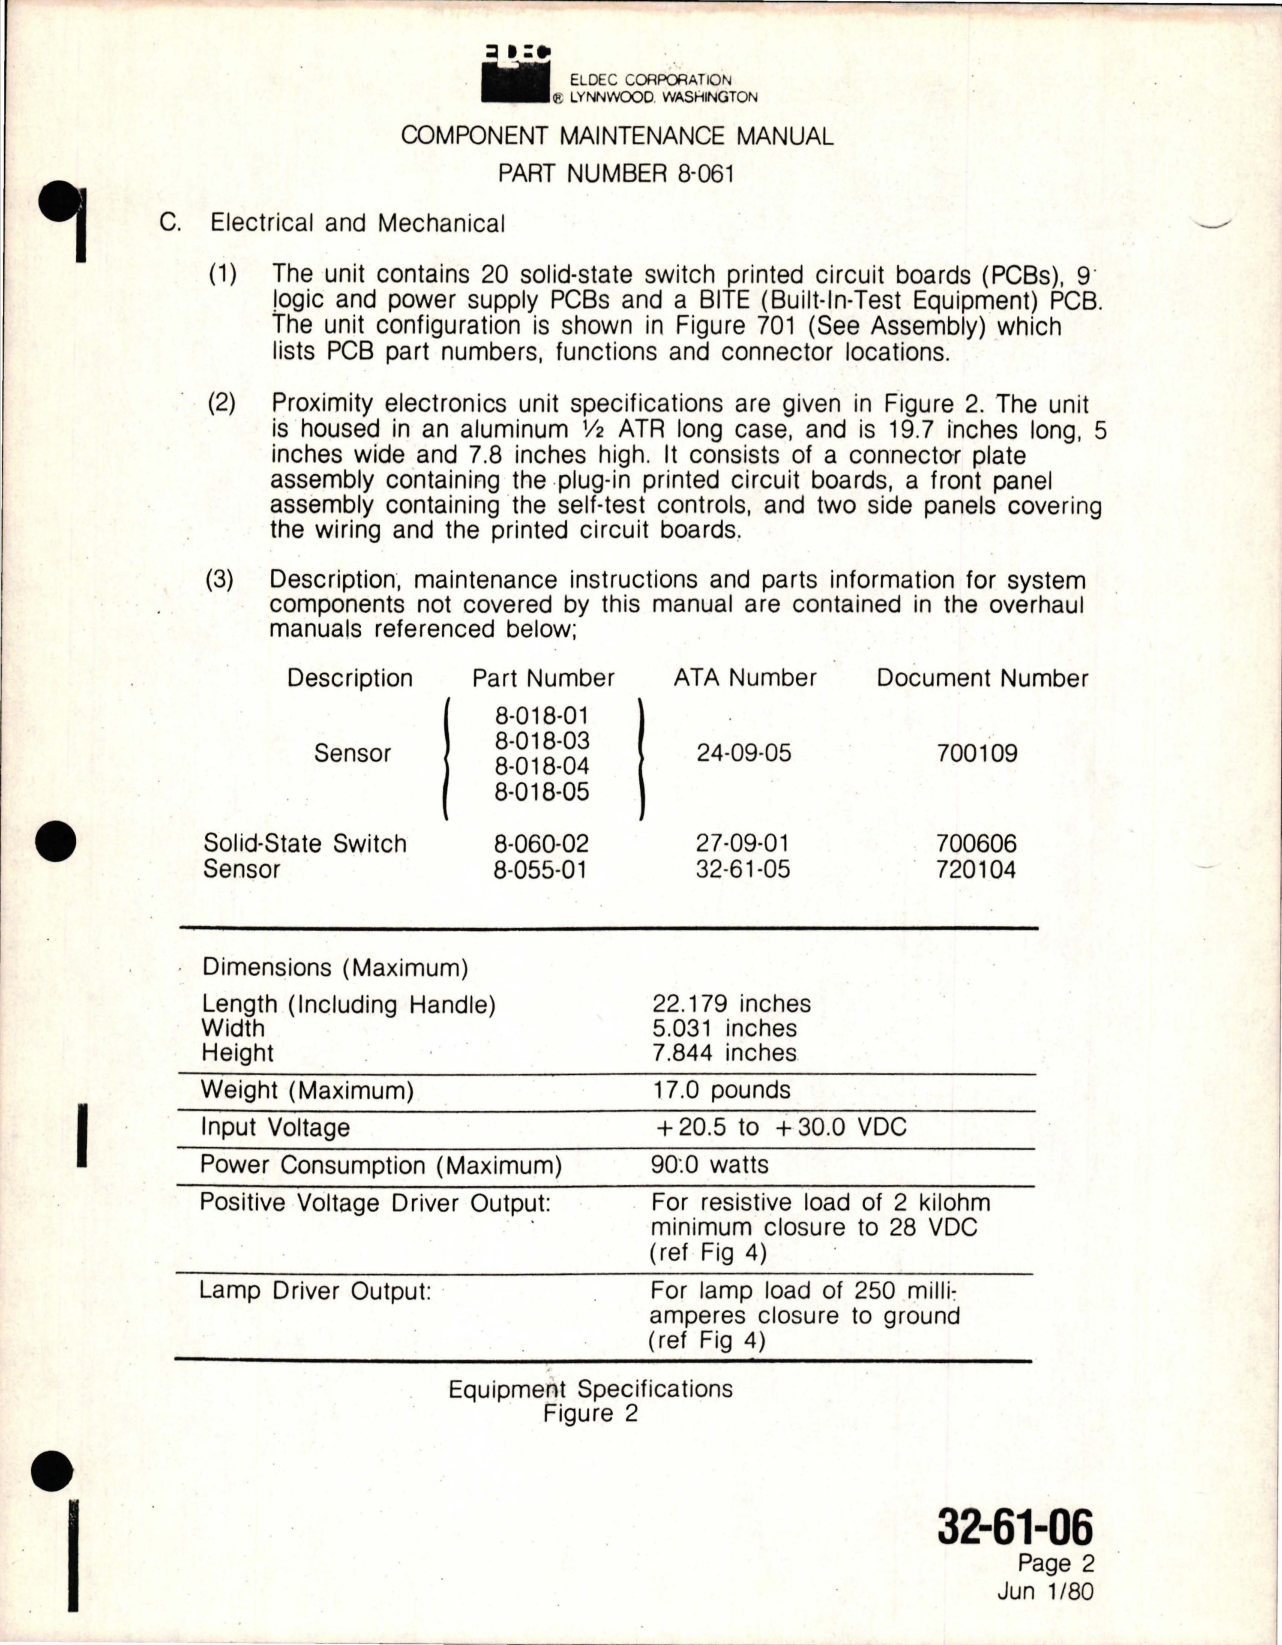 Sample page 9 from AirCorps Library document: Maintenance Manual with Illustrated Parts List for Proximity Electronics Unit - Parts 8-061-06, 8-061-16, and 8-061-26 